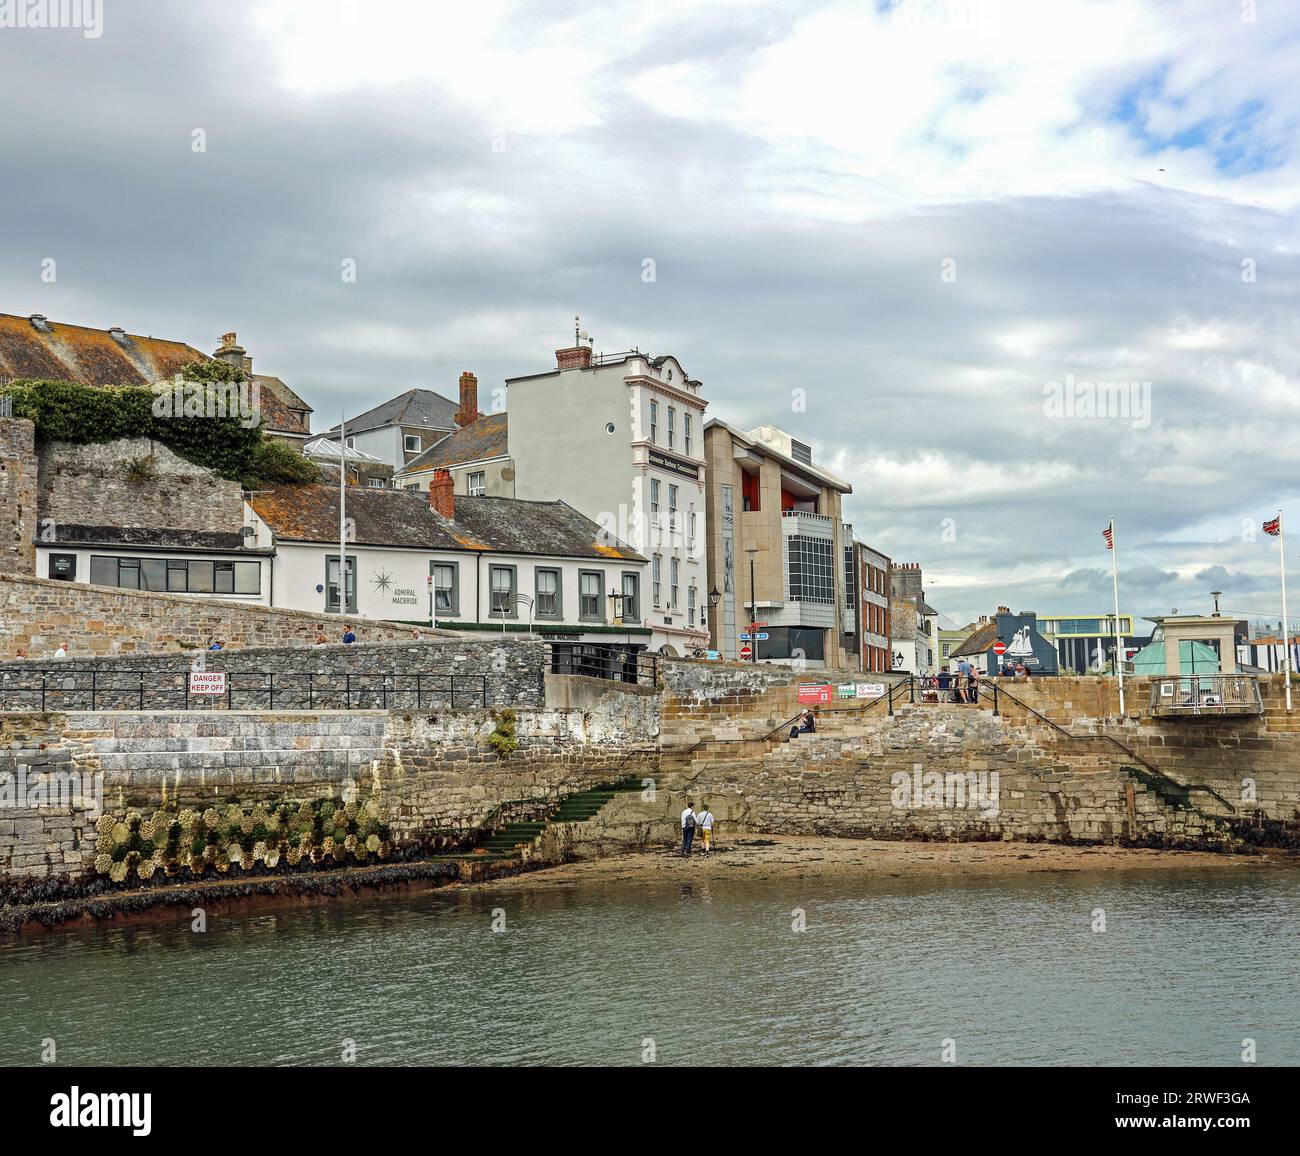 Plymouth’s historic Barbican is home to a living seawall. Organisations from around the world have come together in an attemp to enhance biodiversity Stock Photo